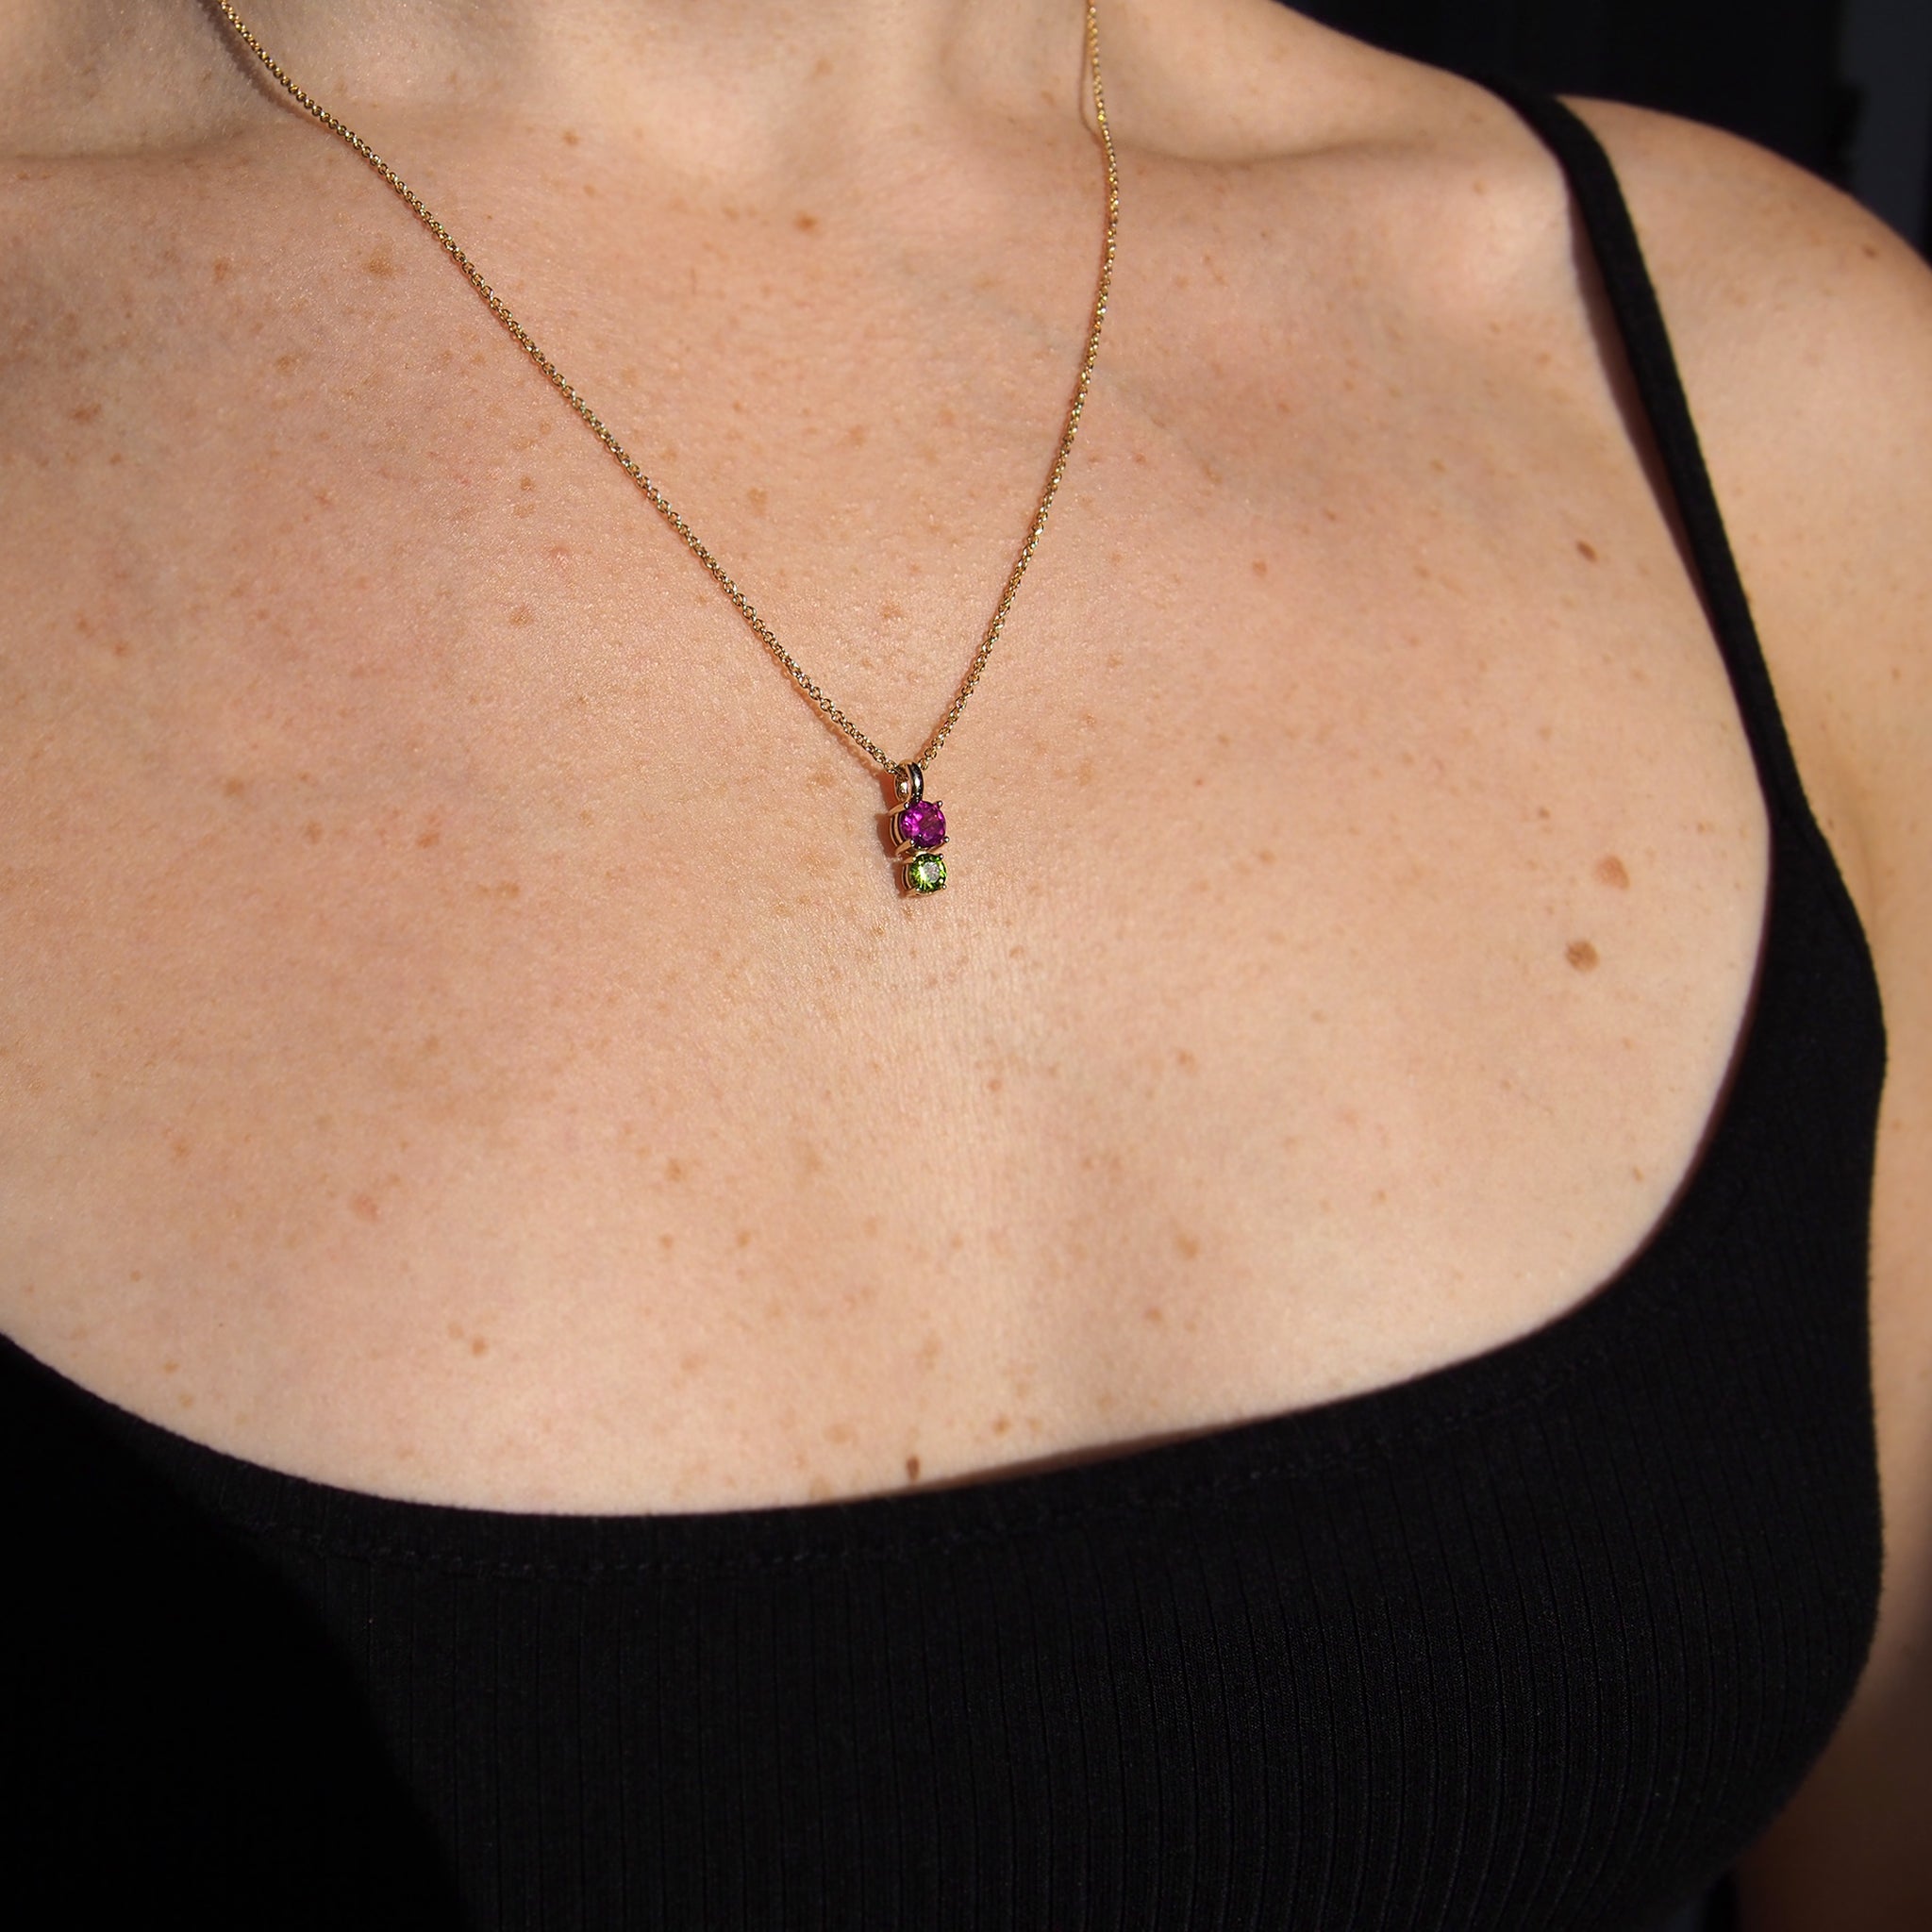 Image of woman wearing necklace with black tank top: Woman wearing Rhododendron pendant with rhodolite garnet and peridot stones on a 20-inch rolo chain in solid 14k yellow gold